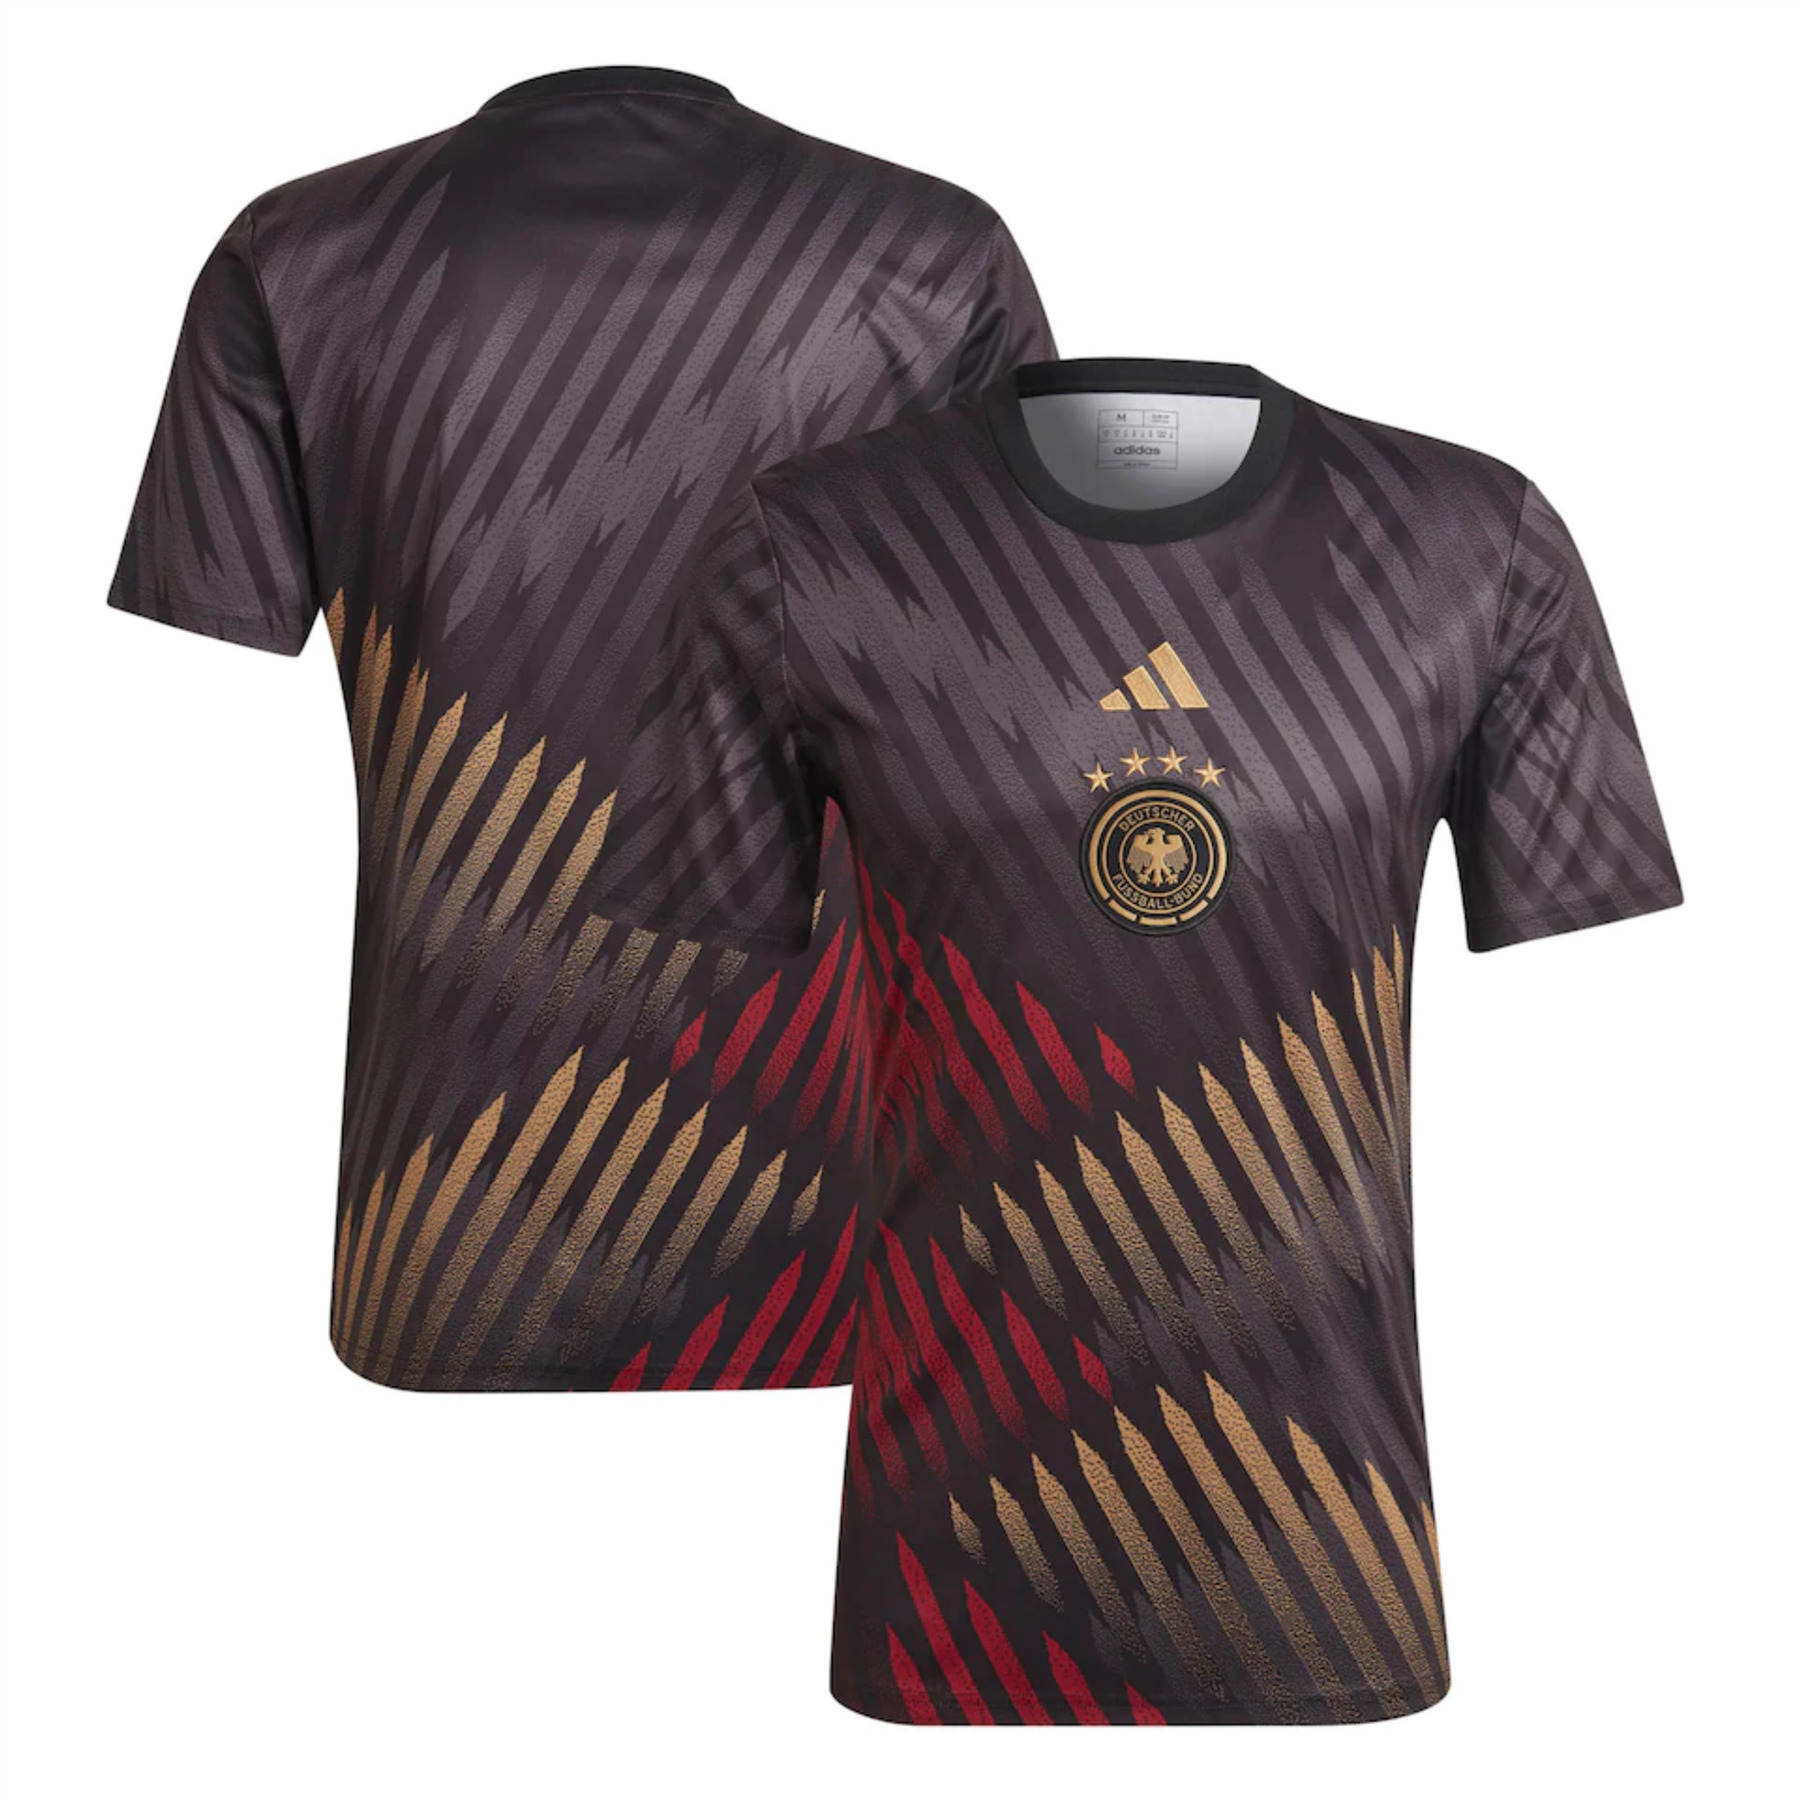 Germany Men's Football Shirt (Size S) adidas Pre-Match Top - New